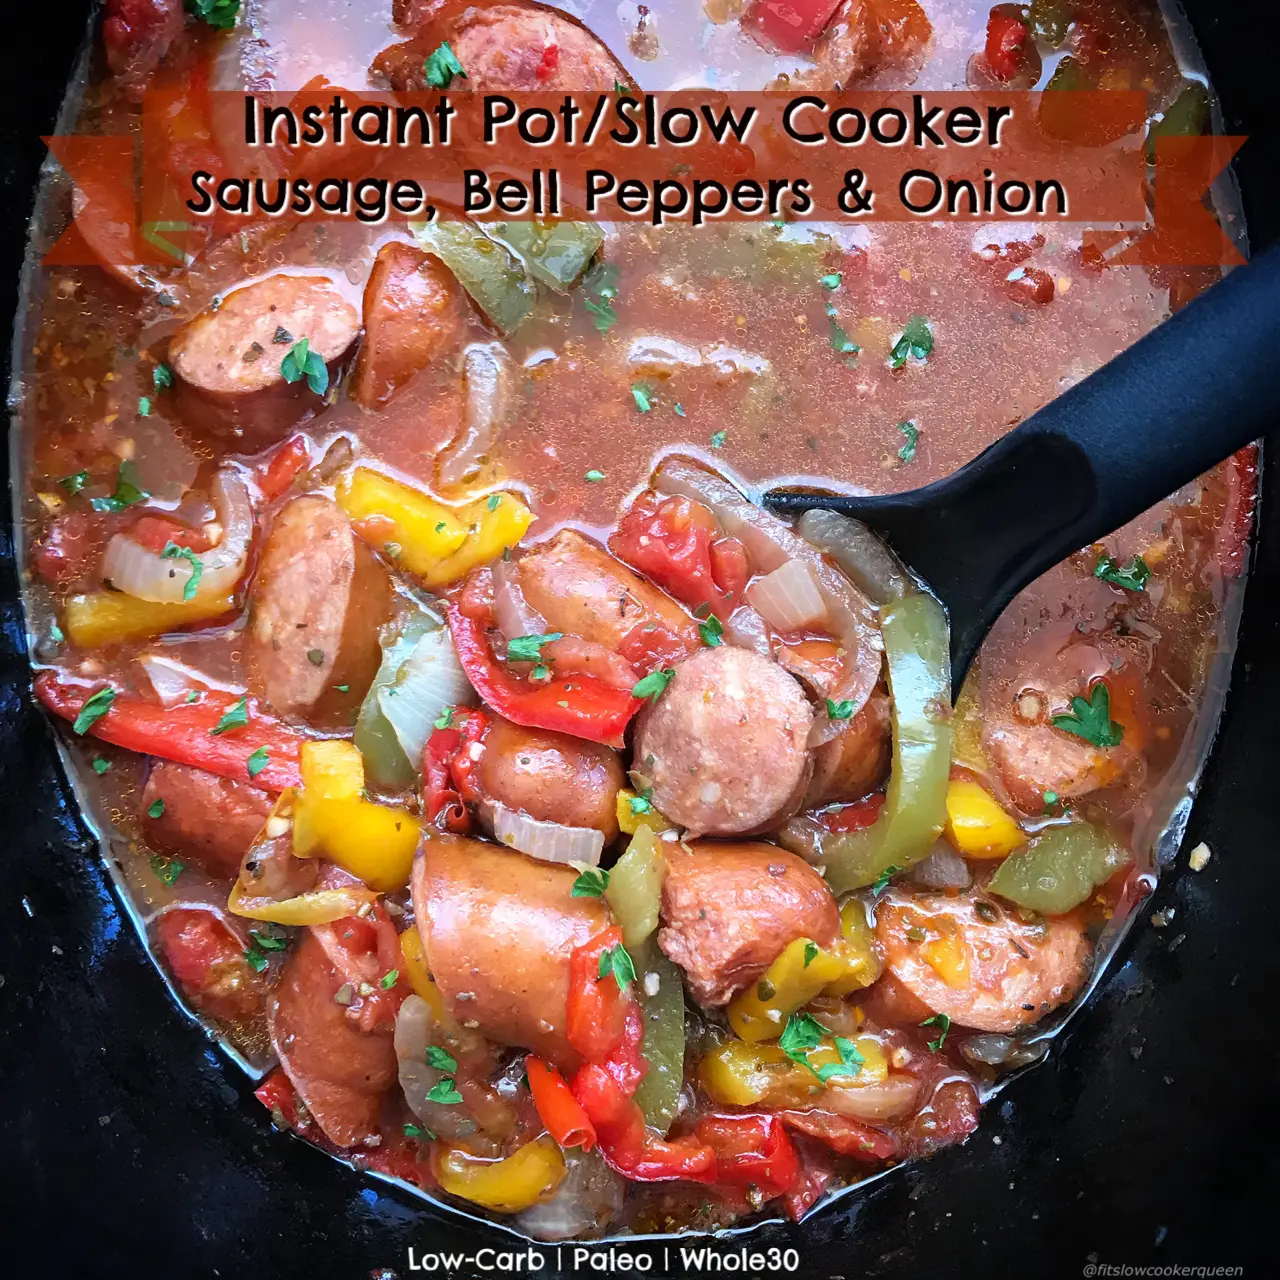 Slow Cooker/Instant Pot Sausage, Bell Peppers &  Onions (Low